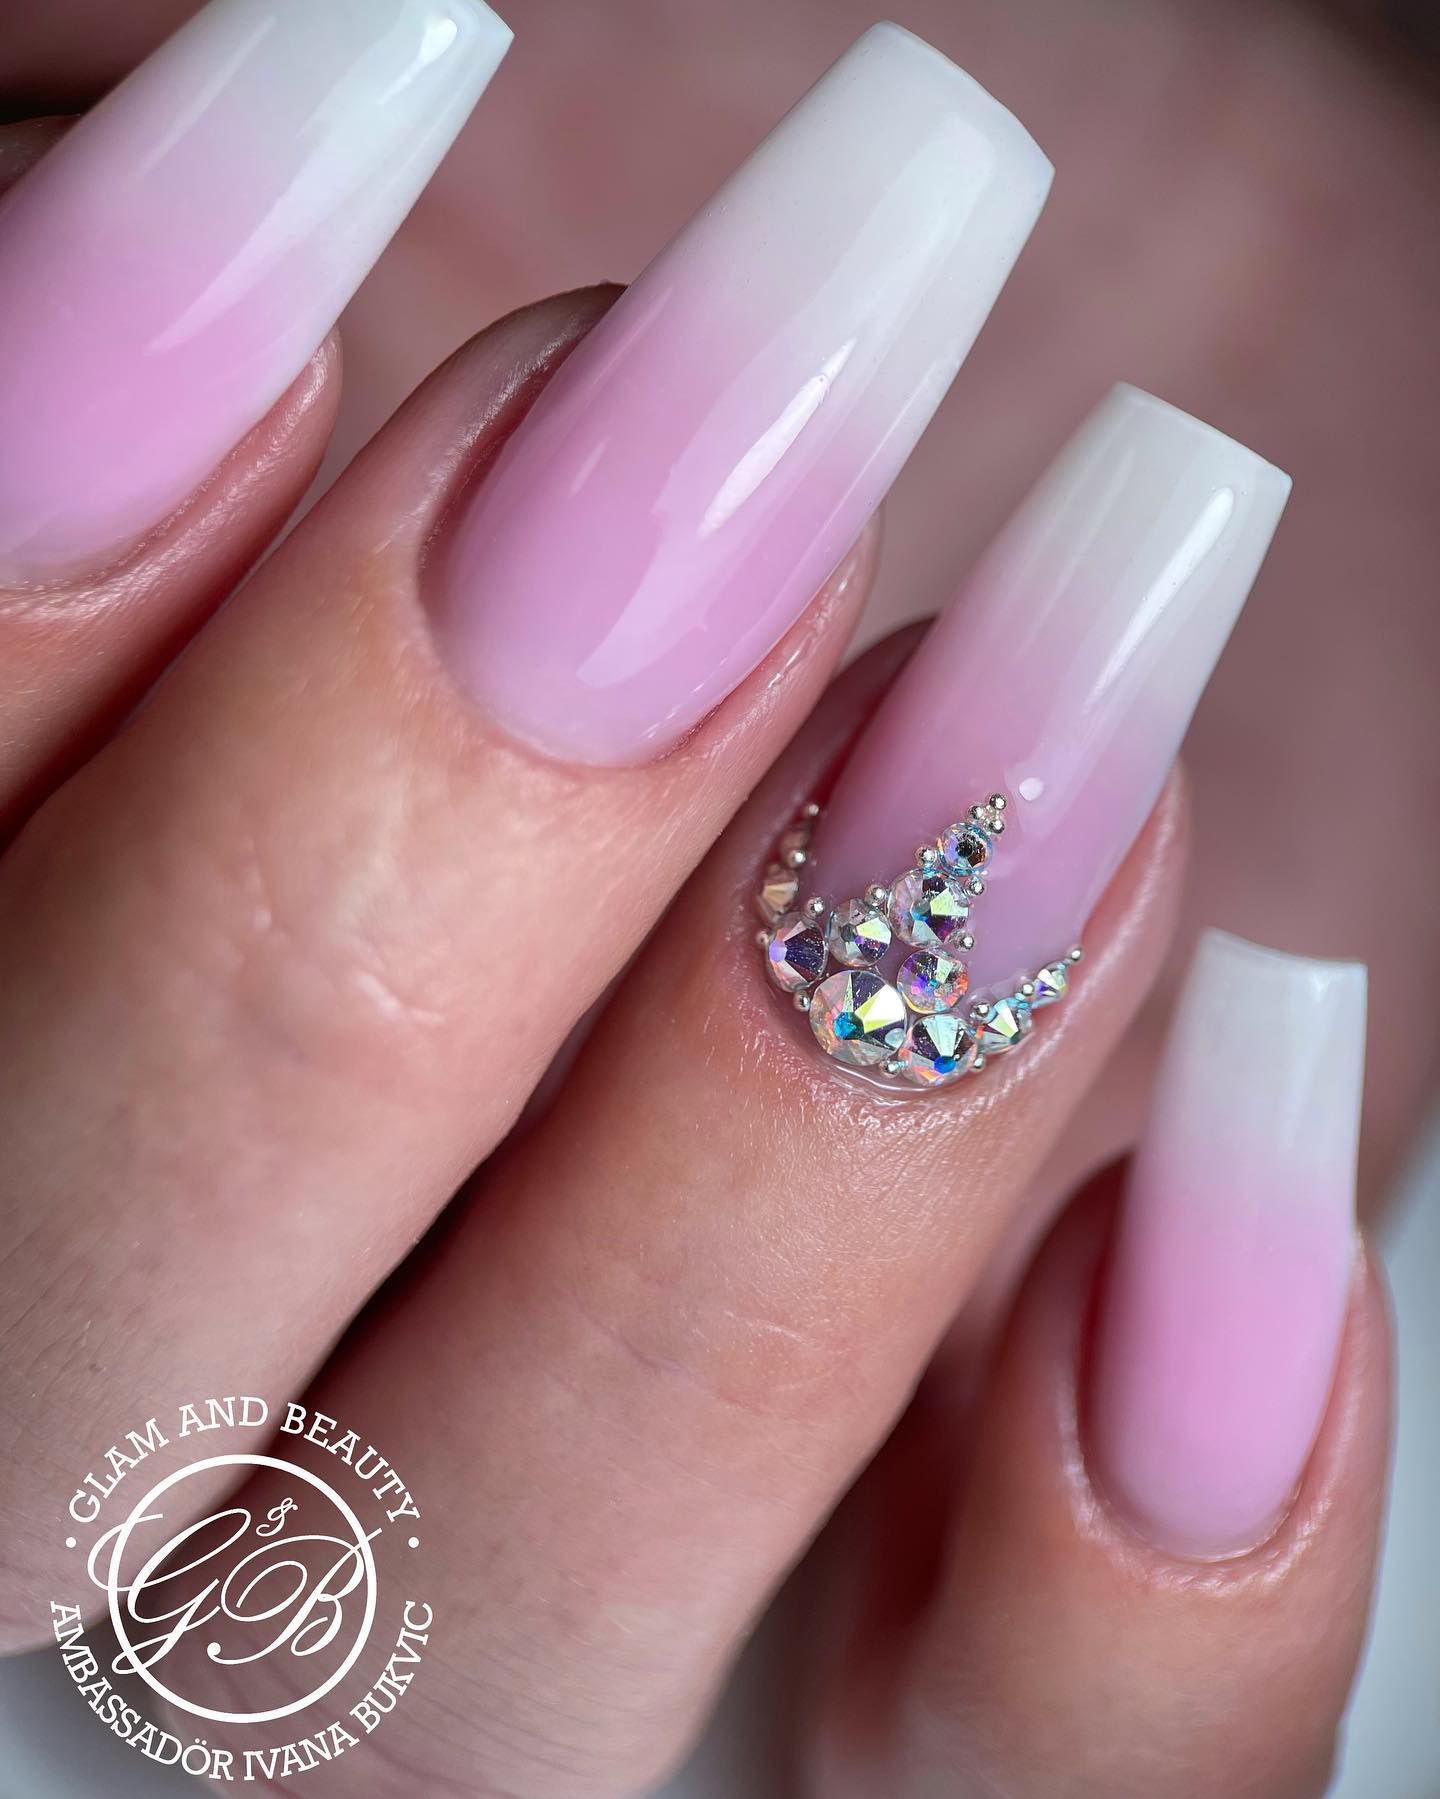 Ballerina nails are a good fit for ombre nail art! To look chic and stylish, keep your nails simple white tip with a pink base. If you think this is so basic, add some gemstones to your accent nail to shine.